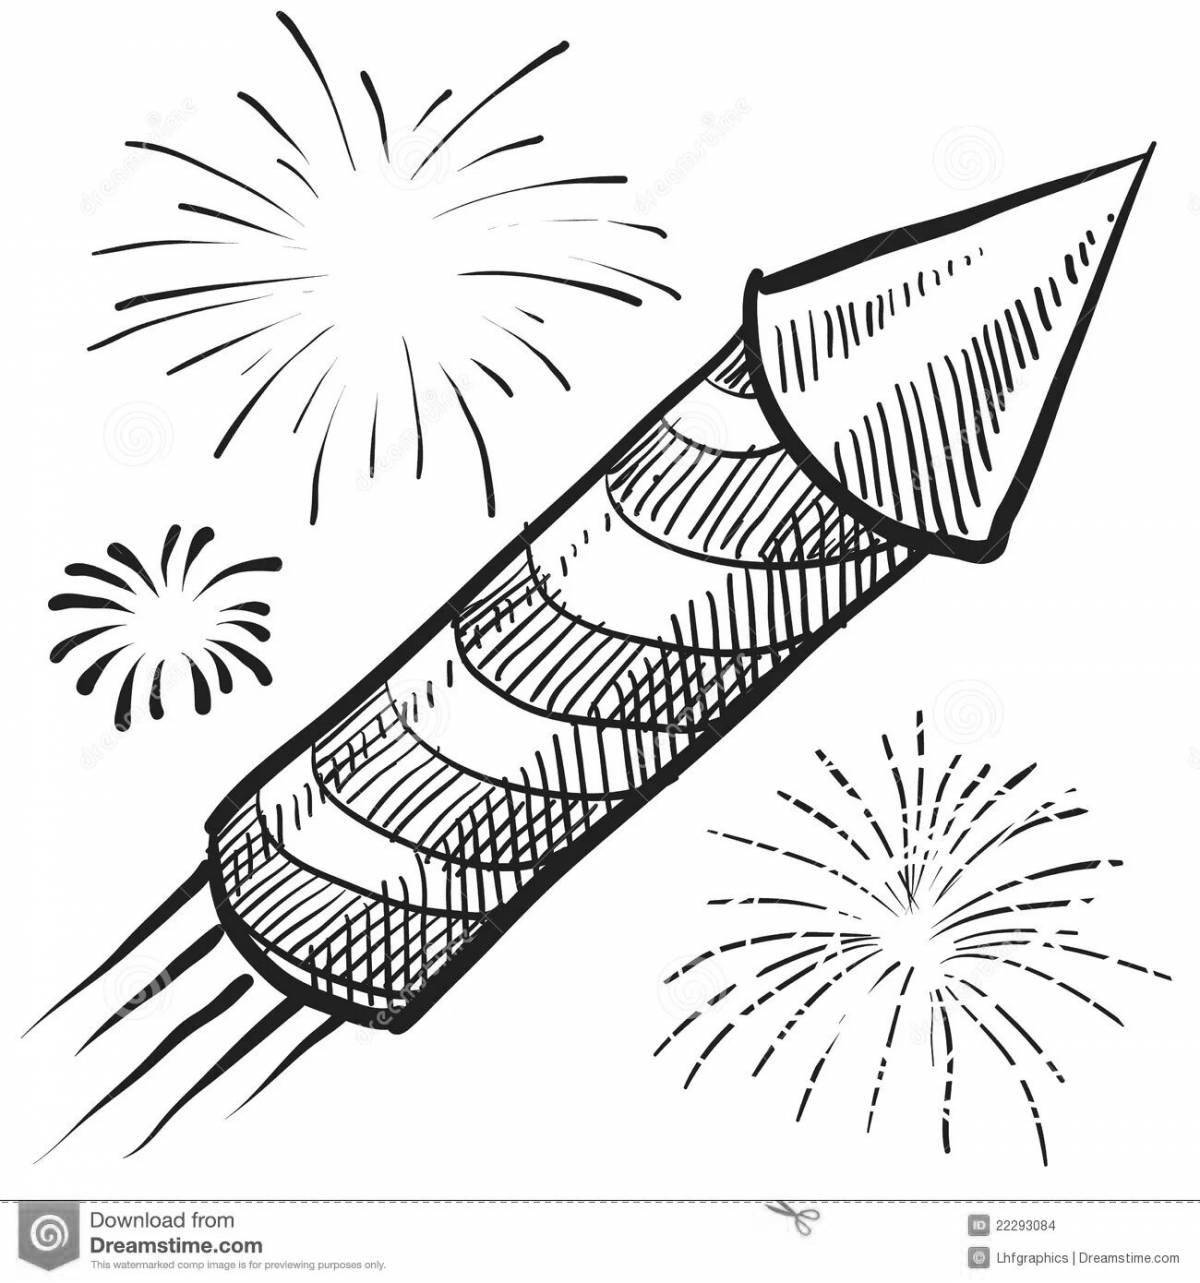 Coloring page festive Christmas cracker